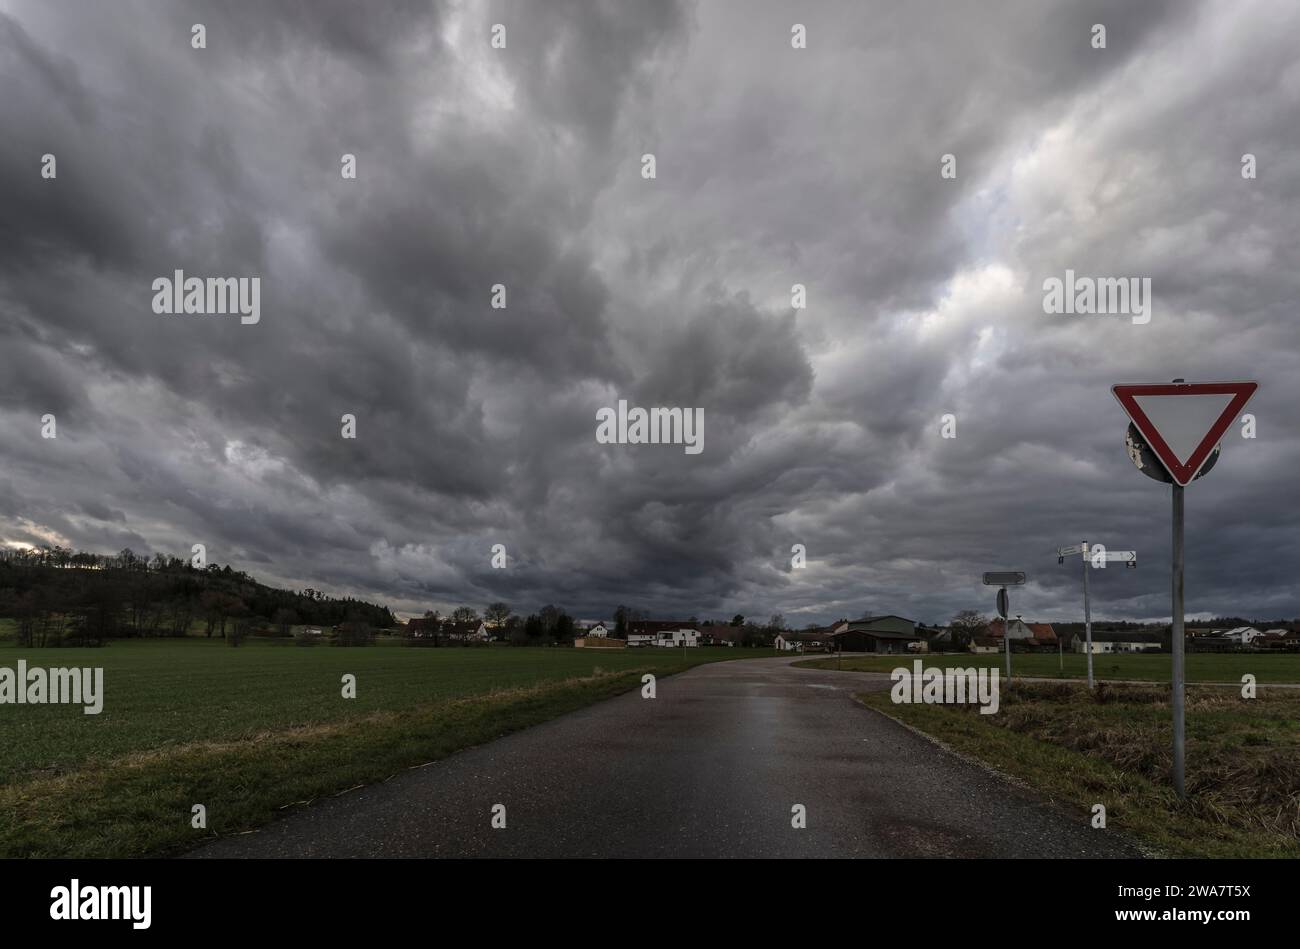 Dramatic storm clouds in a rural landscape. Stock Photo